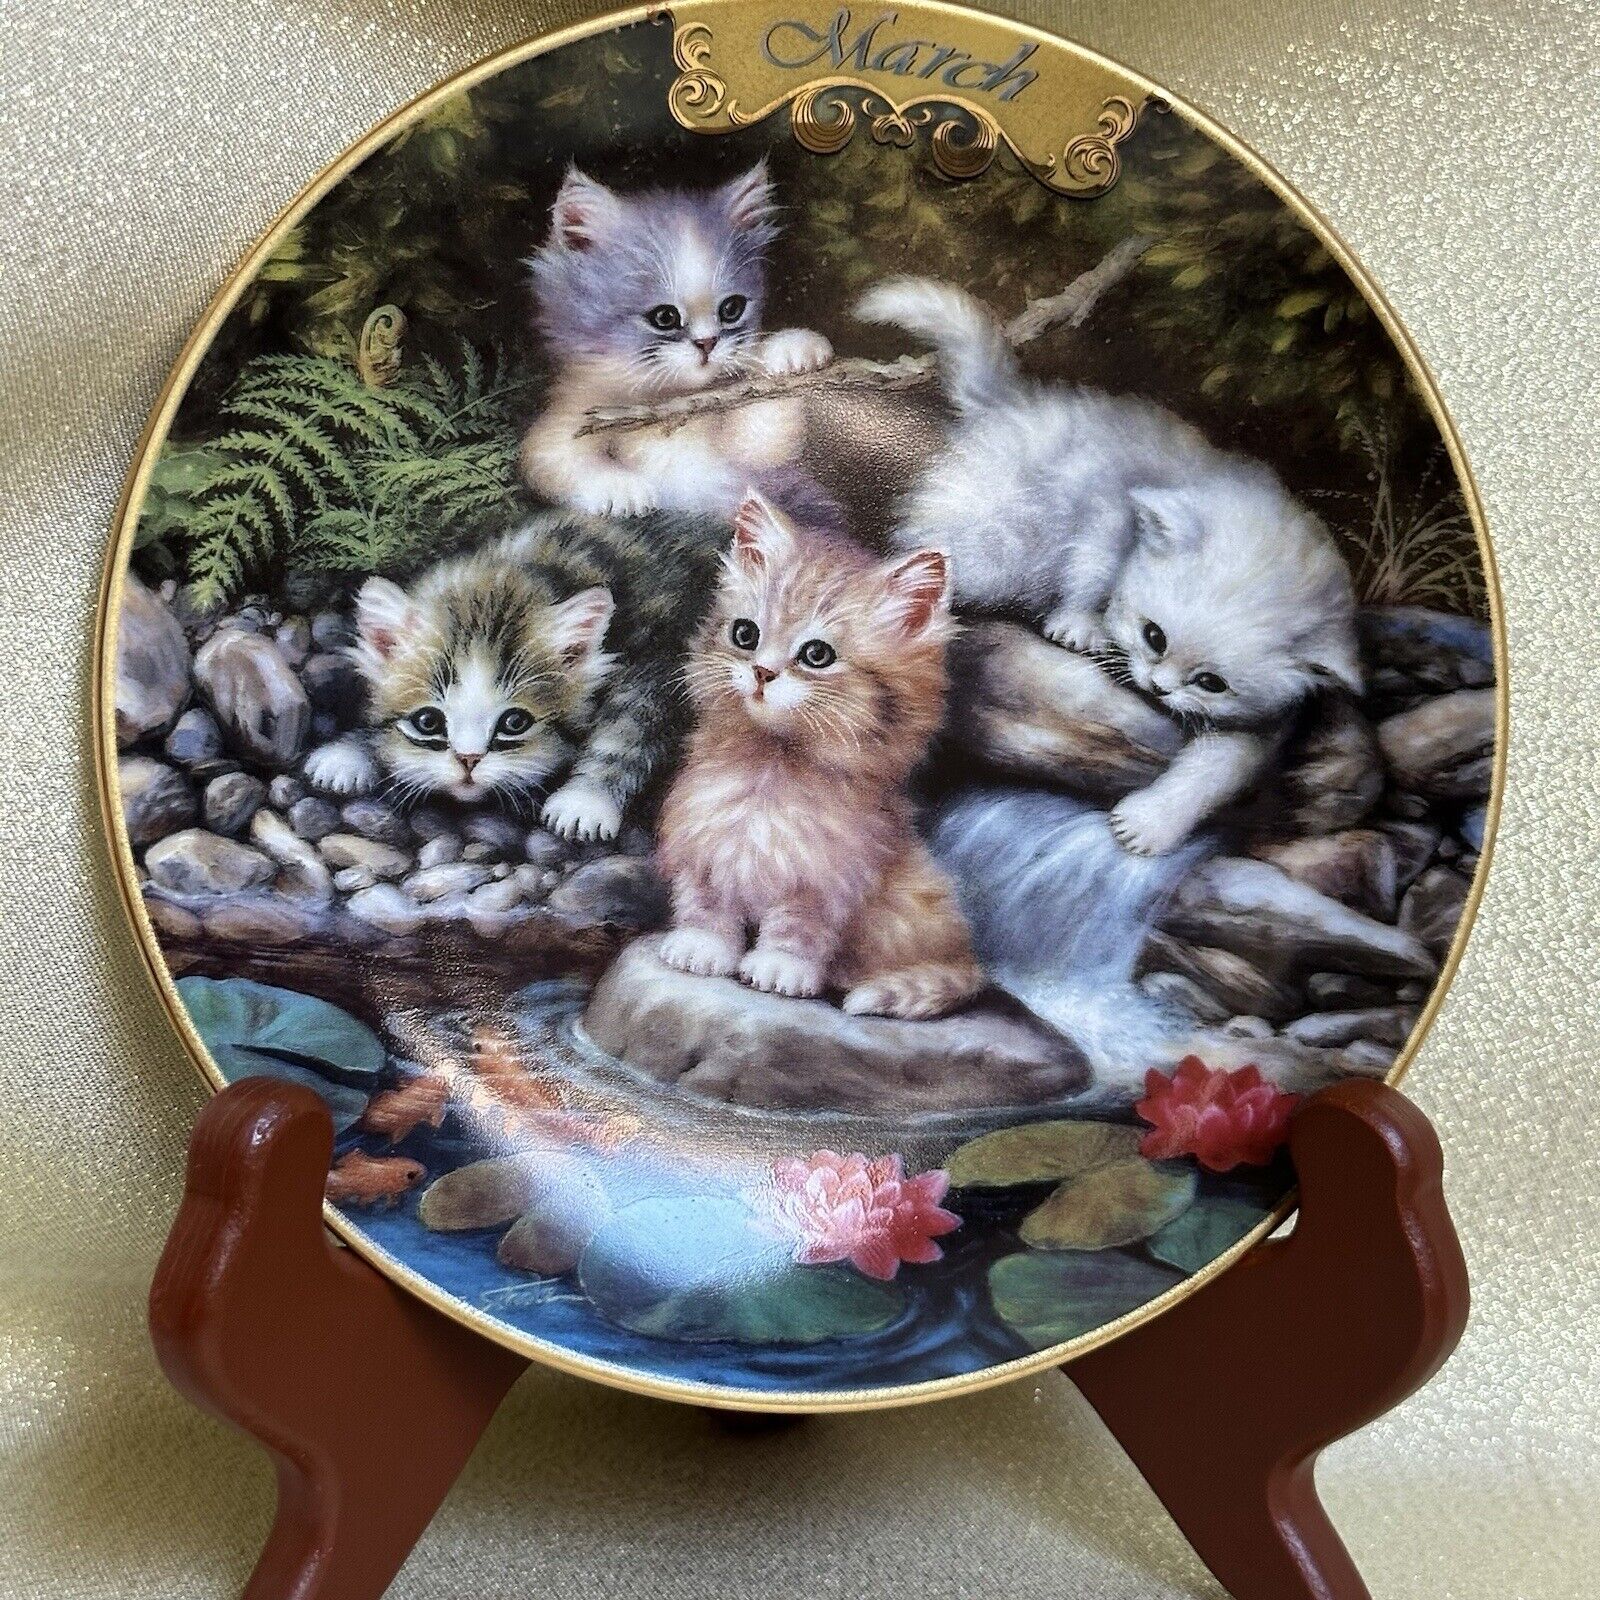 MARCH - BY THE LILY POND  Antique Plate Kittens Bradford Exchange. Plate NoB352